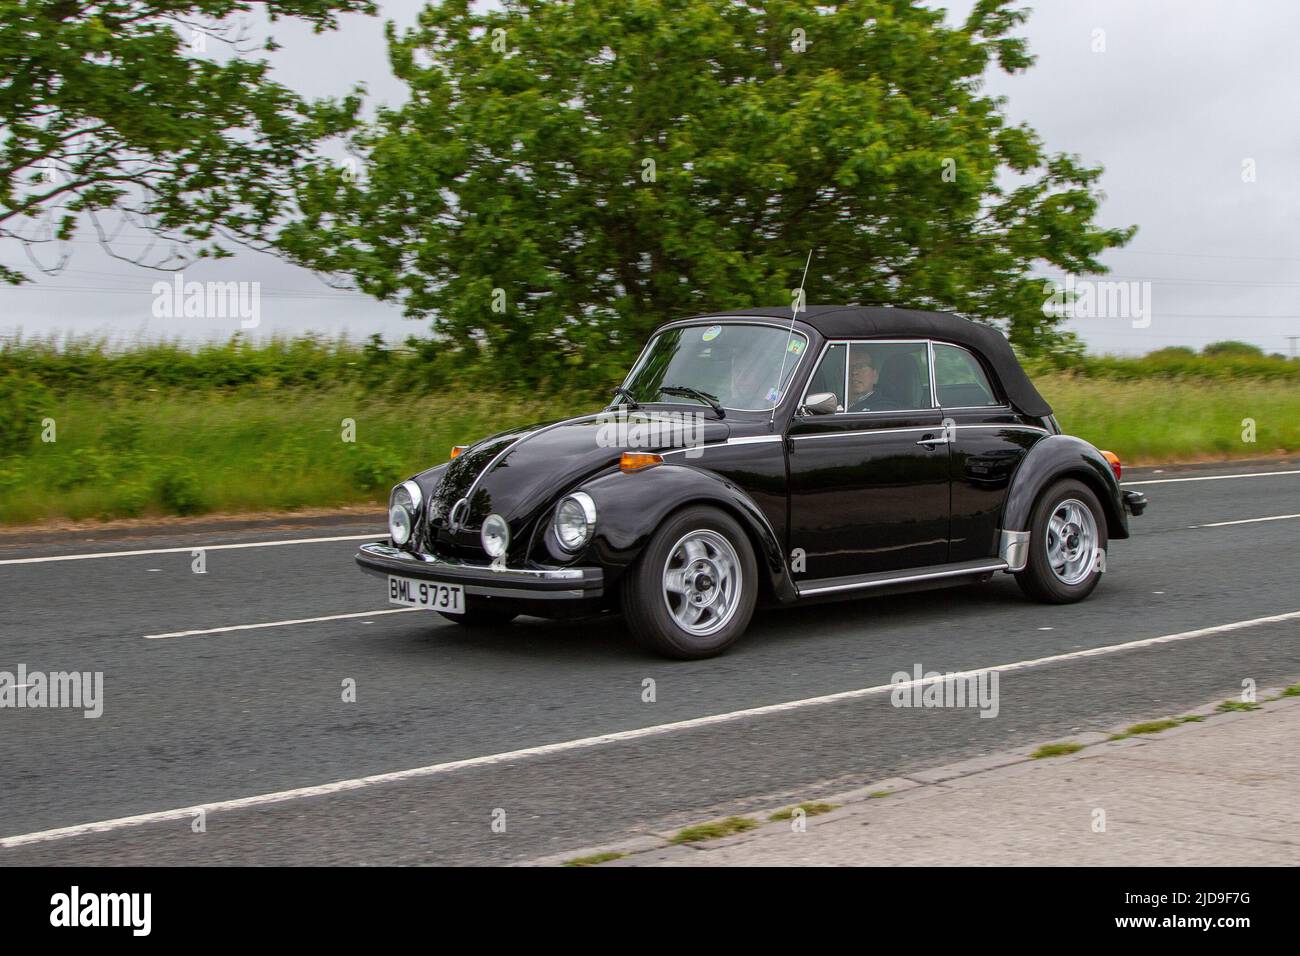 1979 lack VW Volkswagen Beetle 1584cc petrol air-cooled car; classic, modern classic, supercars and specialist vehicles en-route to Lytham St Annes, Lancashire, UK Stock Photo